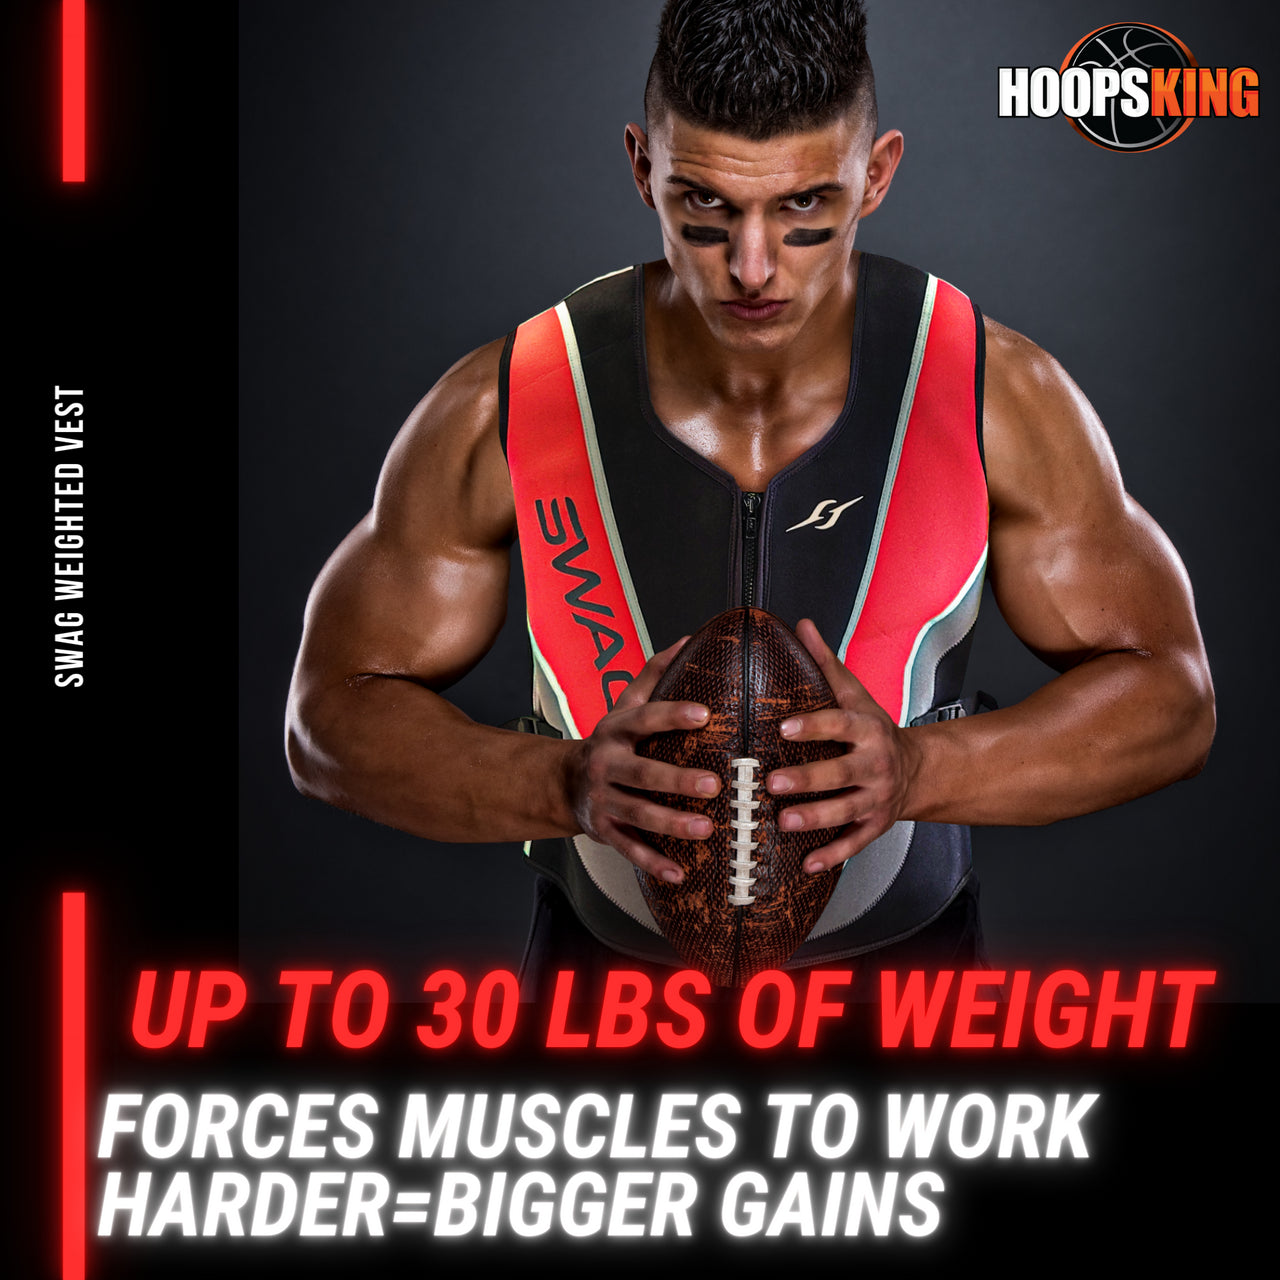 weighted vest for athletes football basketball